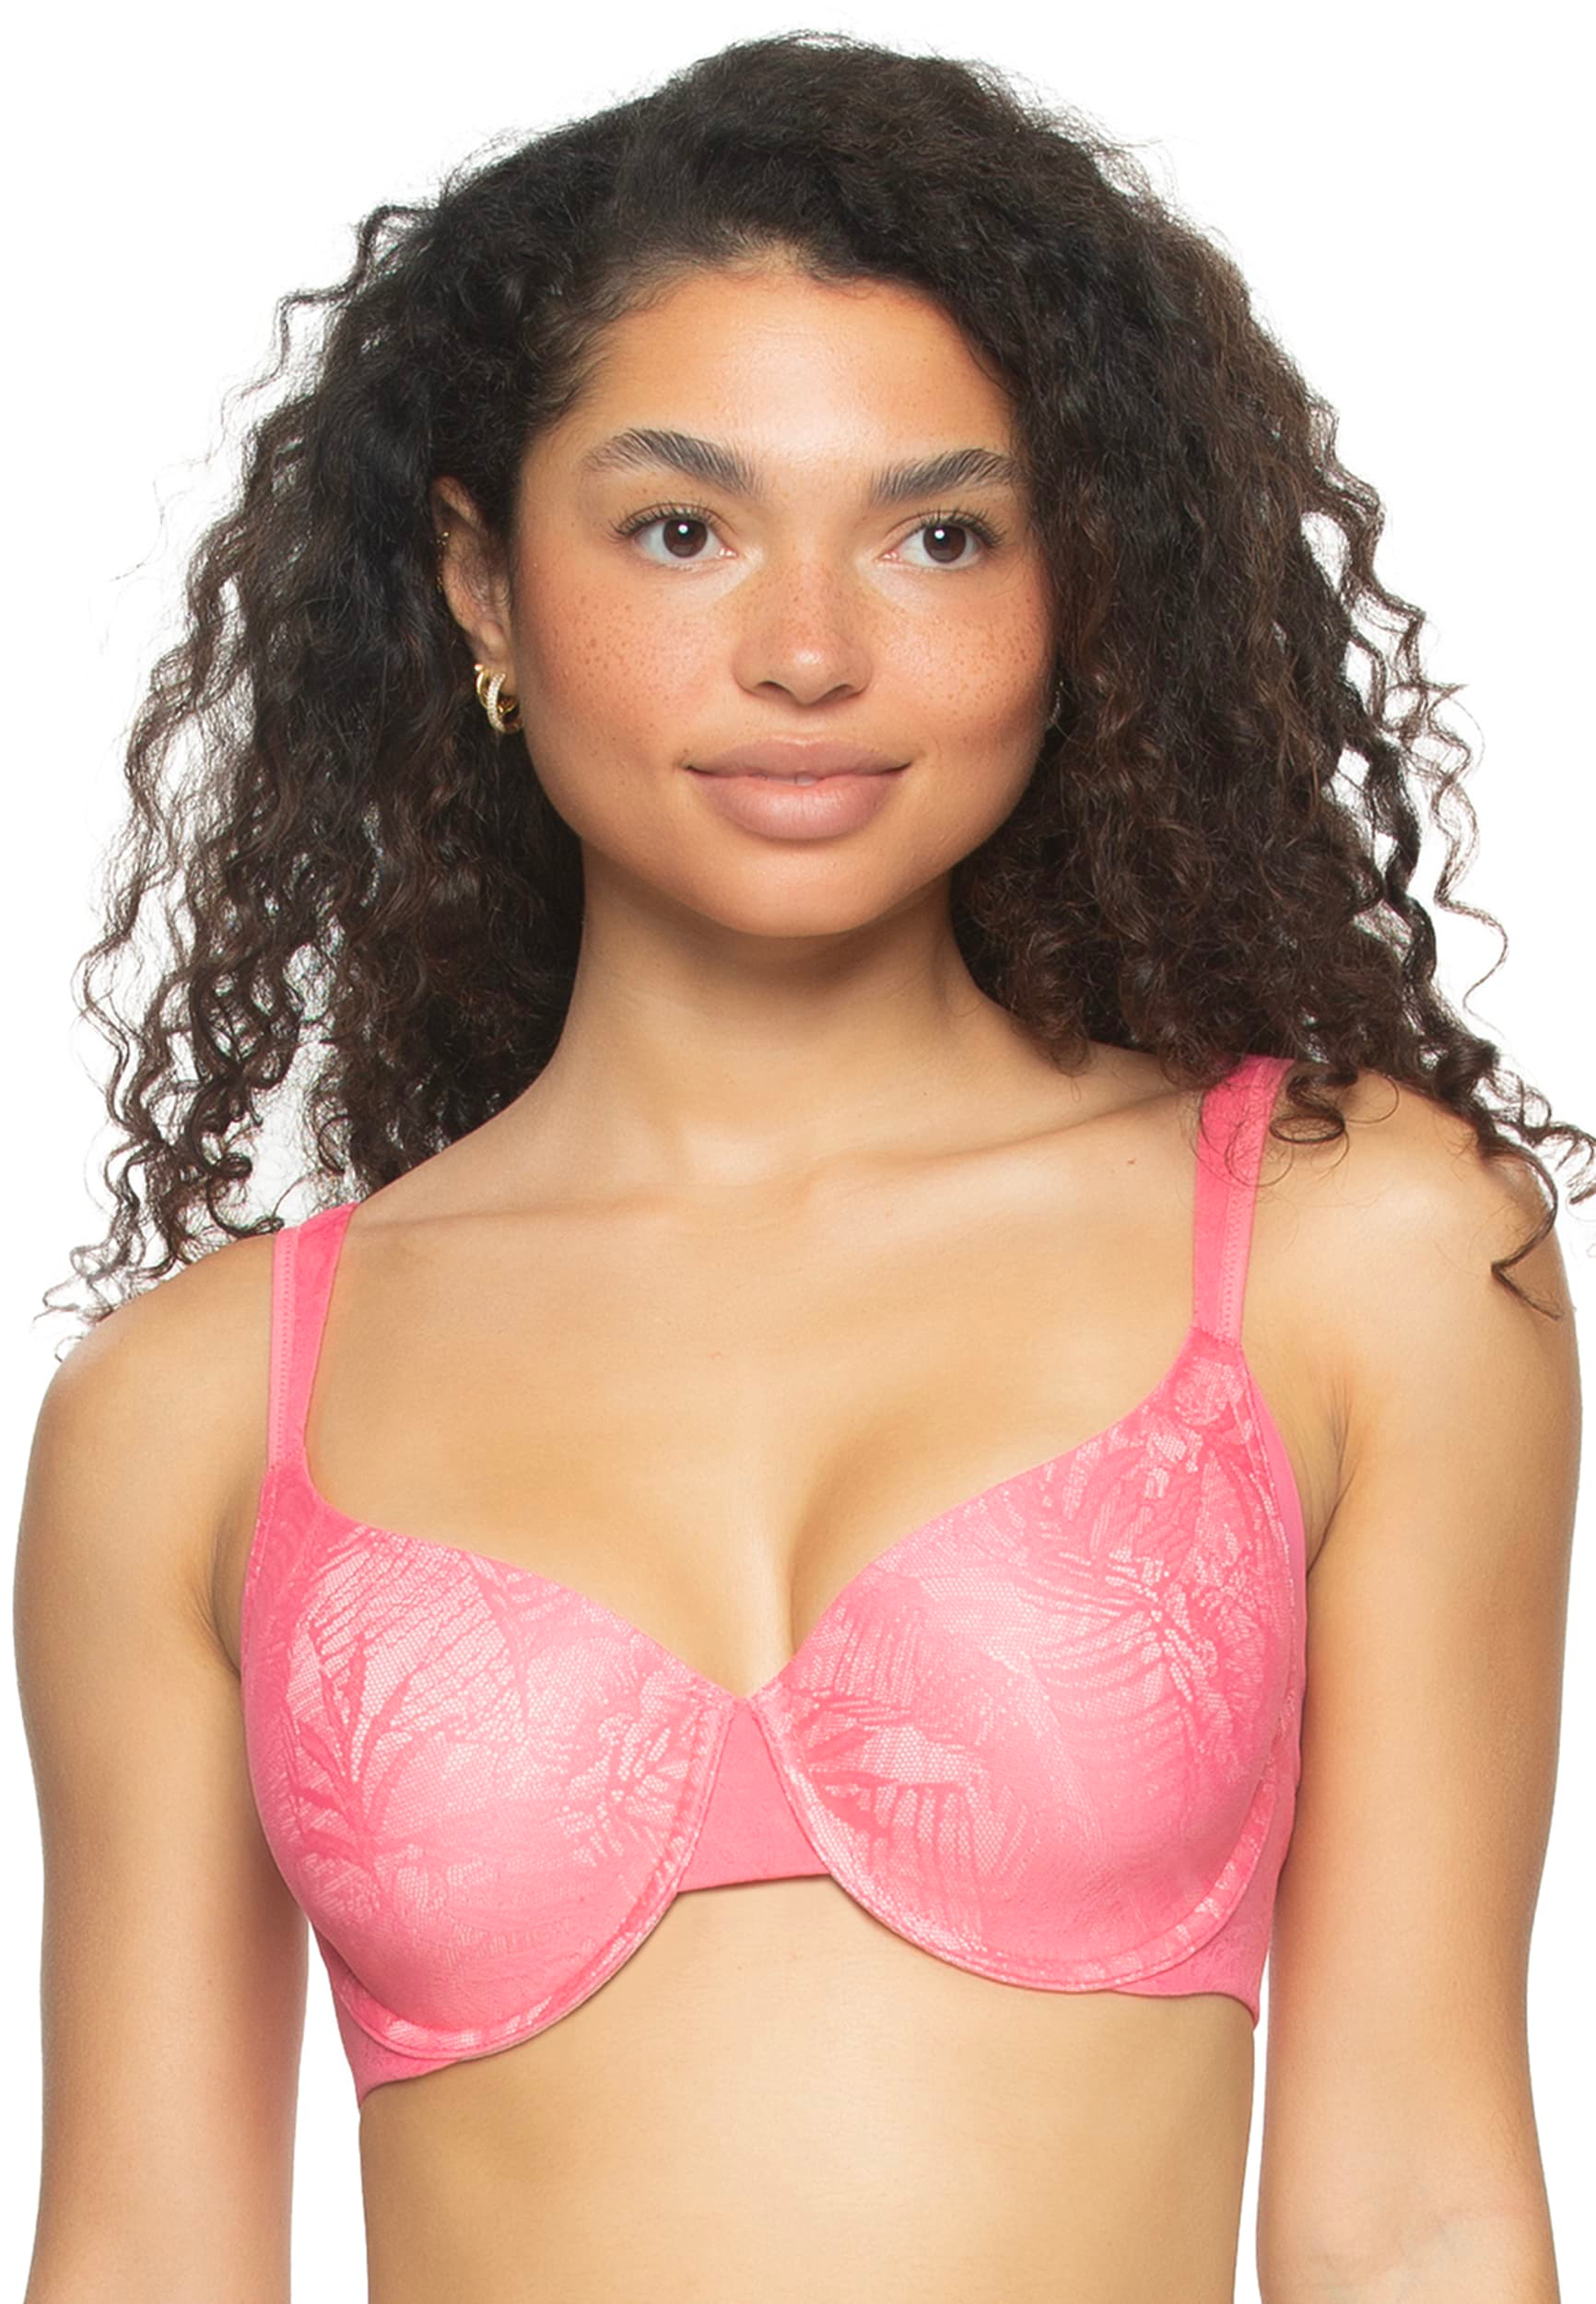 Maurices Creates Hometown Bra Drive to Support Women's Self-Esteem and  Confidence